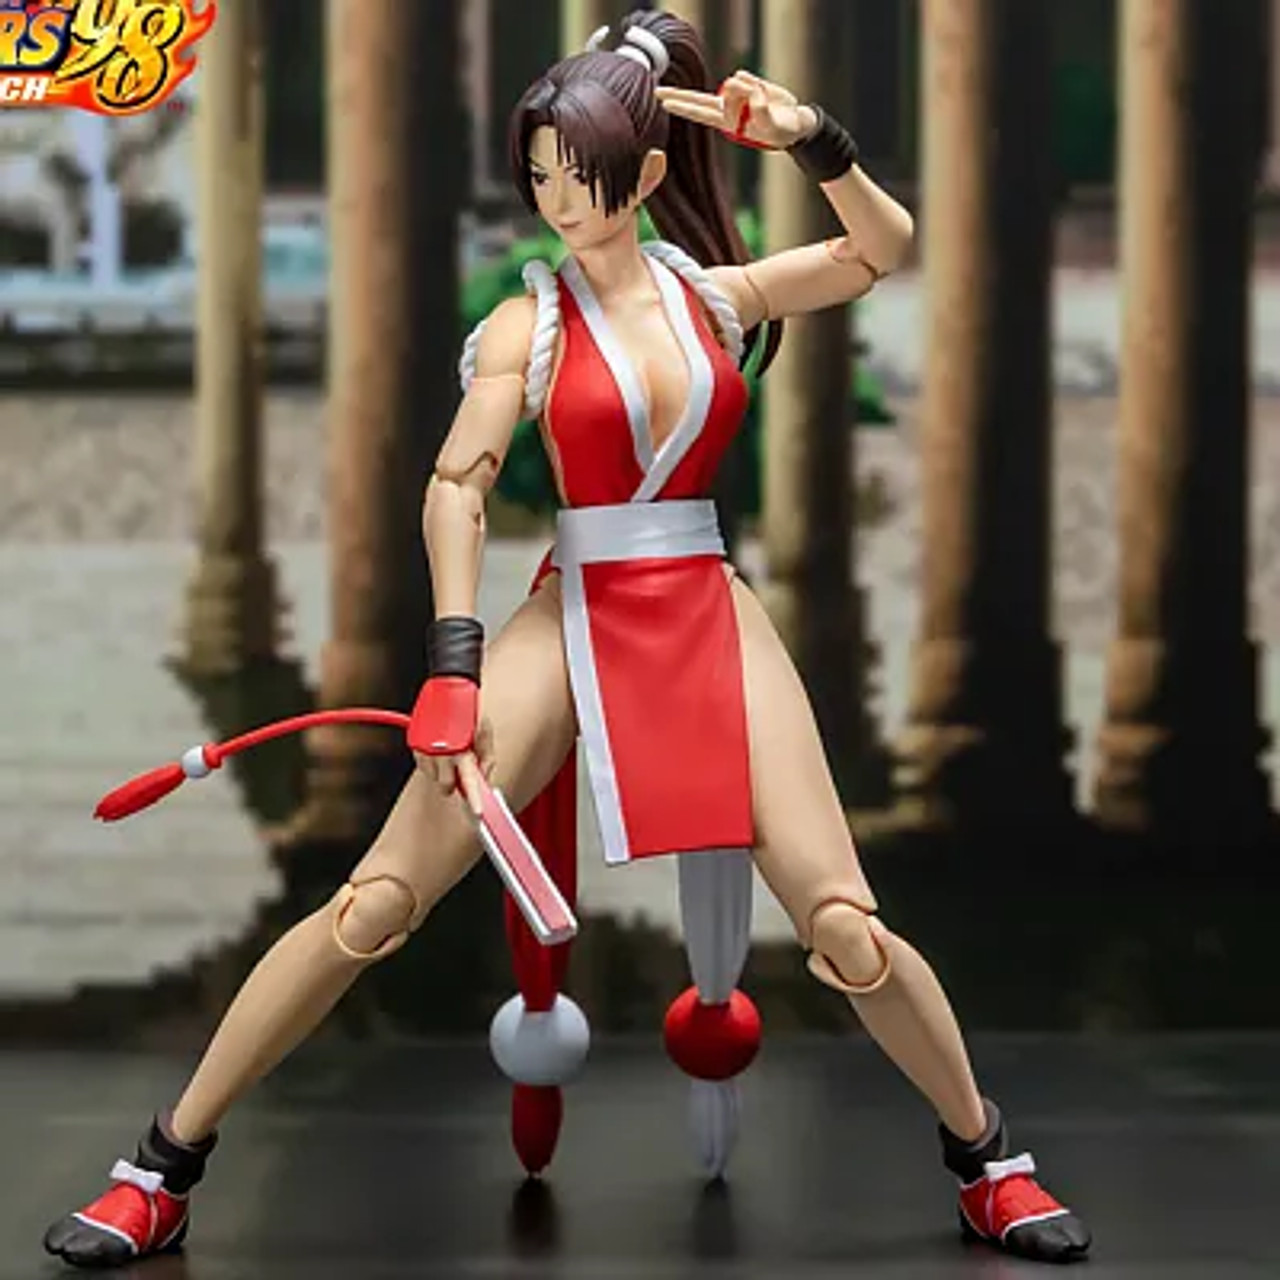 King of Fighters 2002 - Kyo Kusanagi Figure by Storm Collectibles